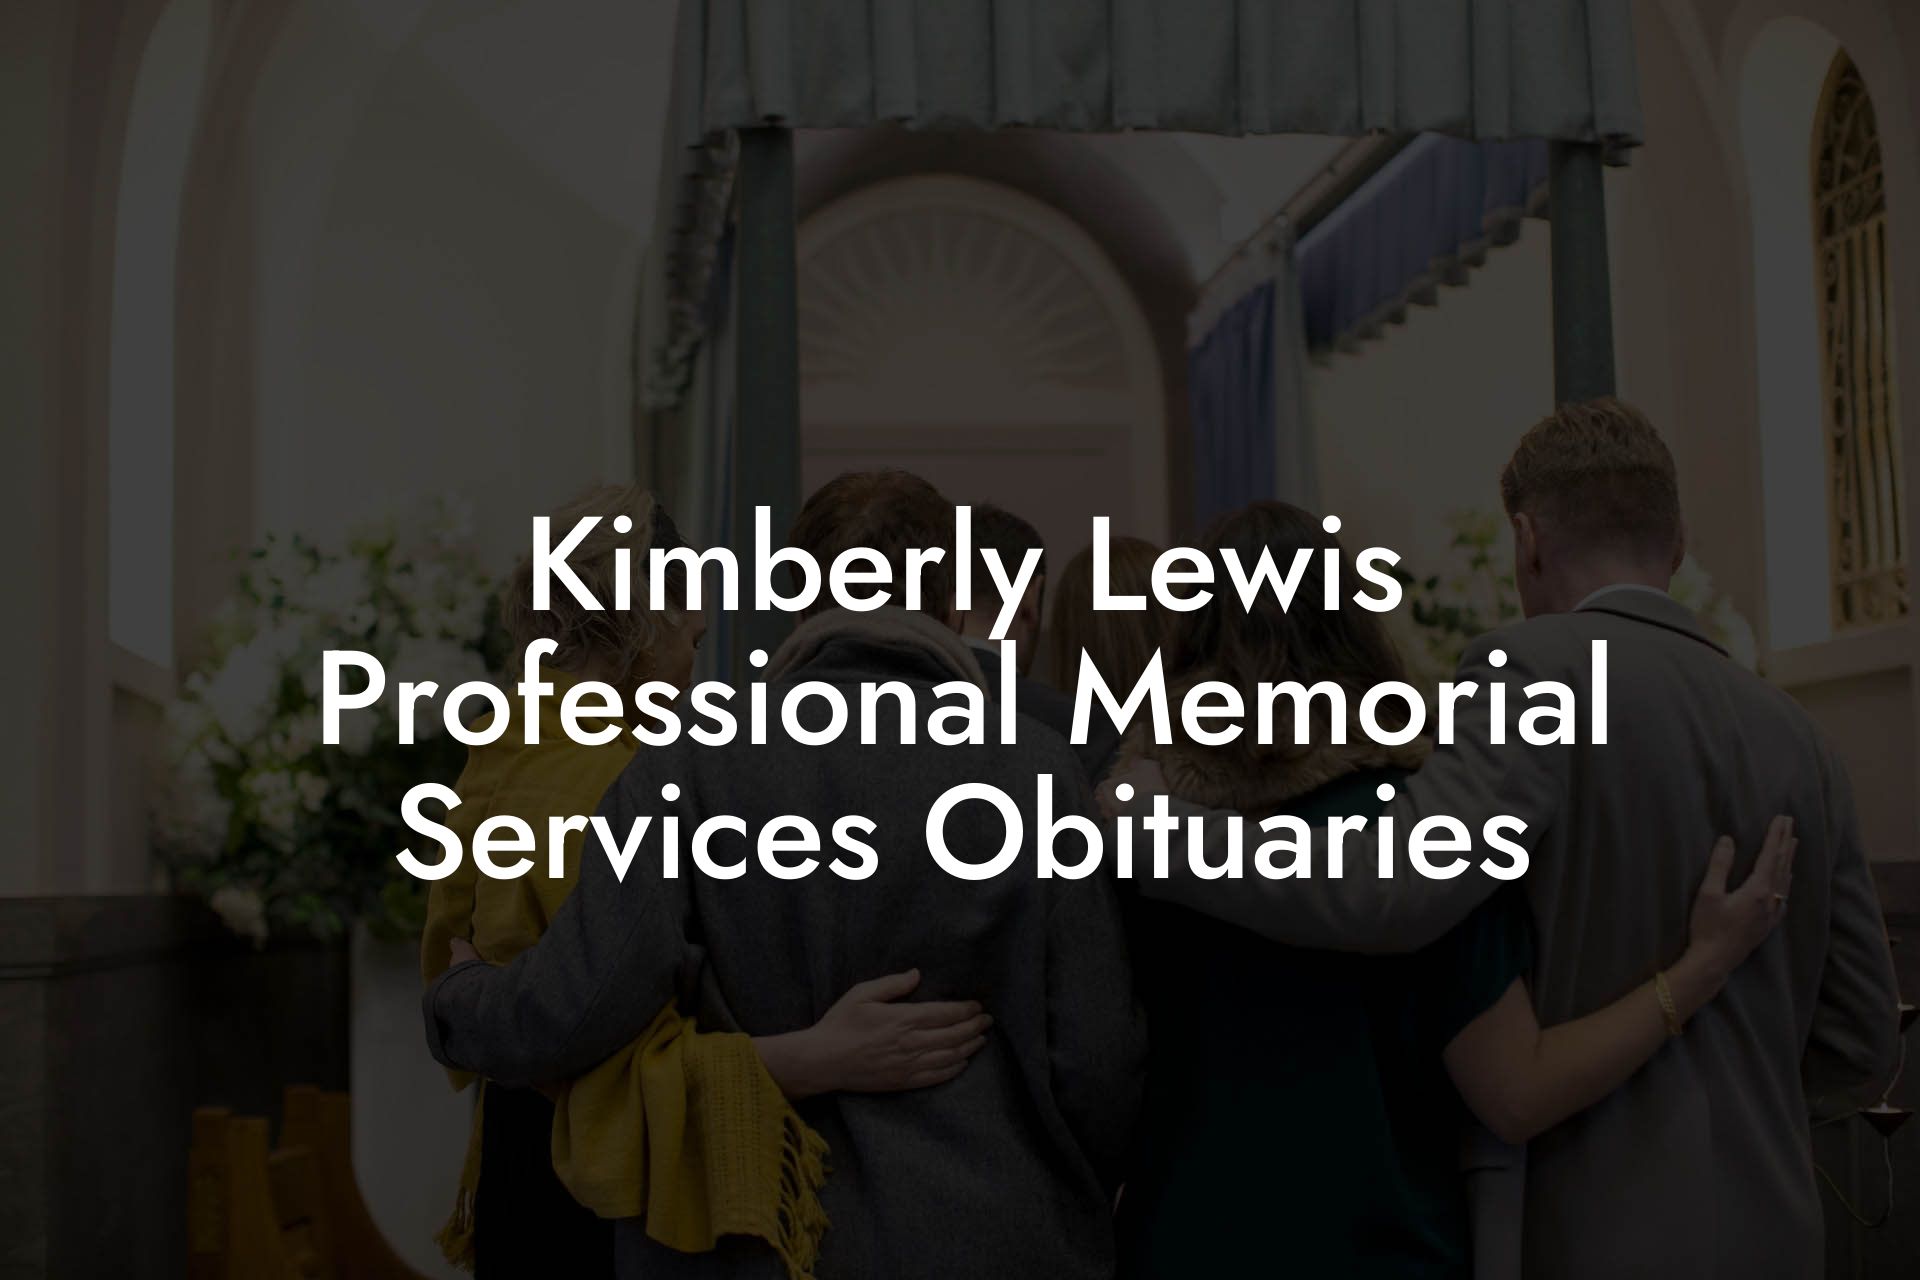 Kimberly Lewis Professional Memorial Services Obituaries